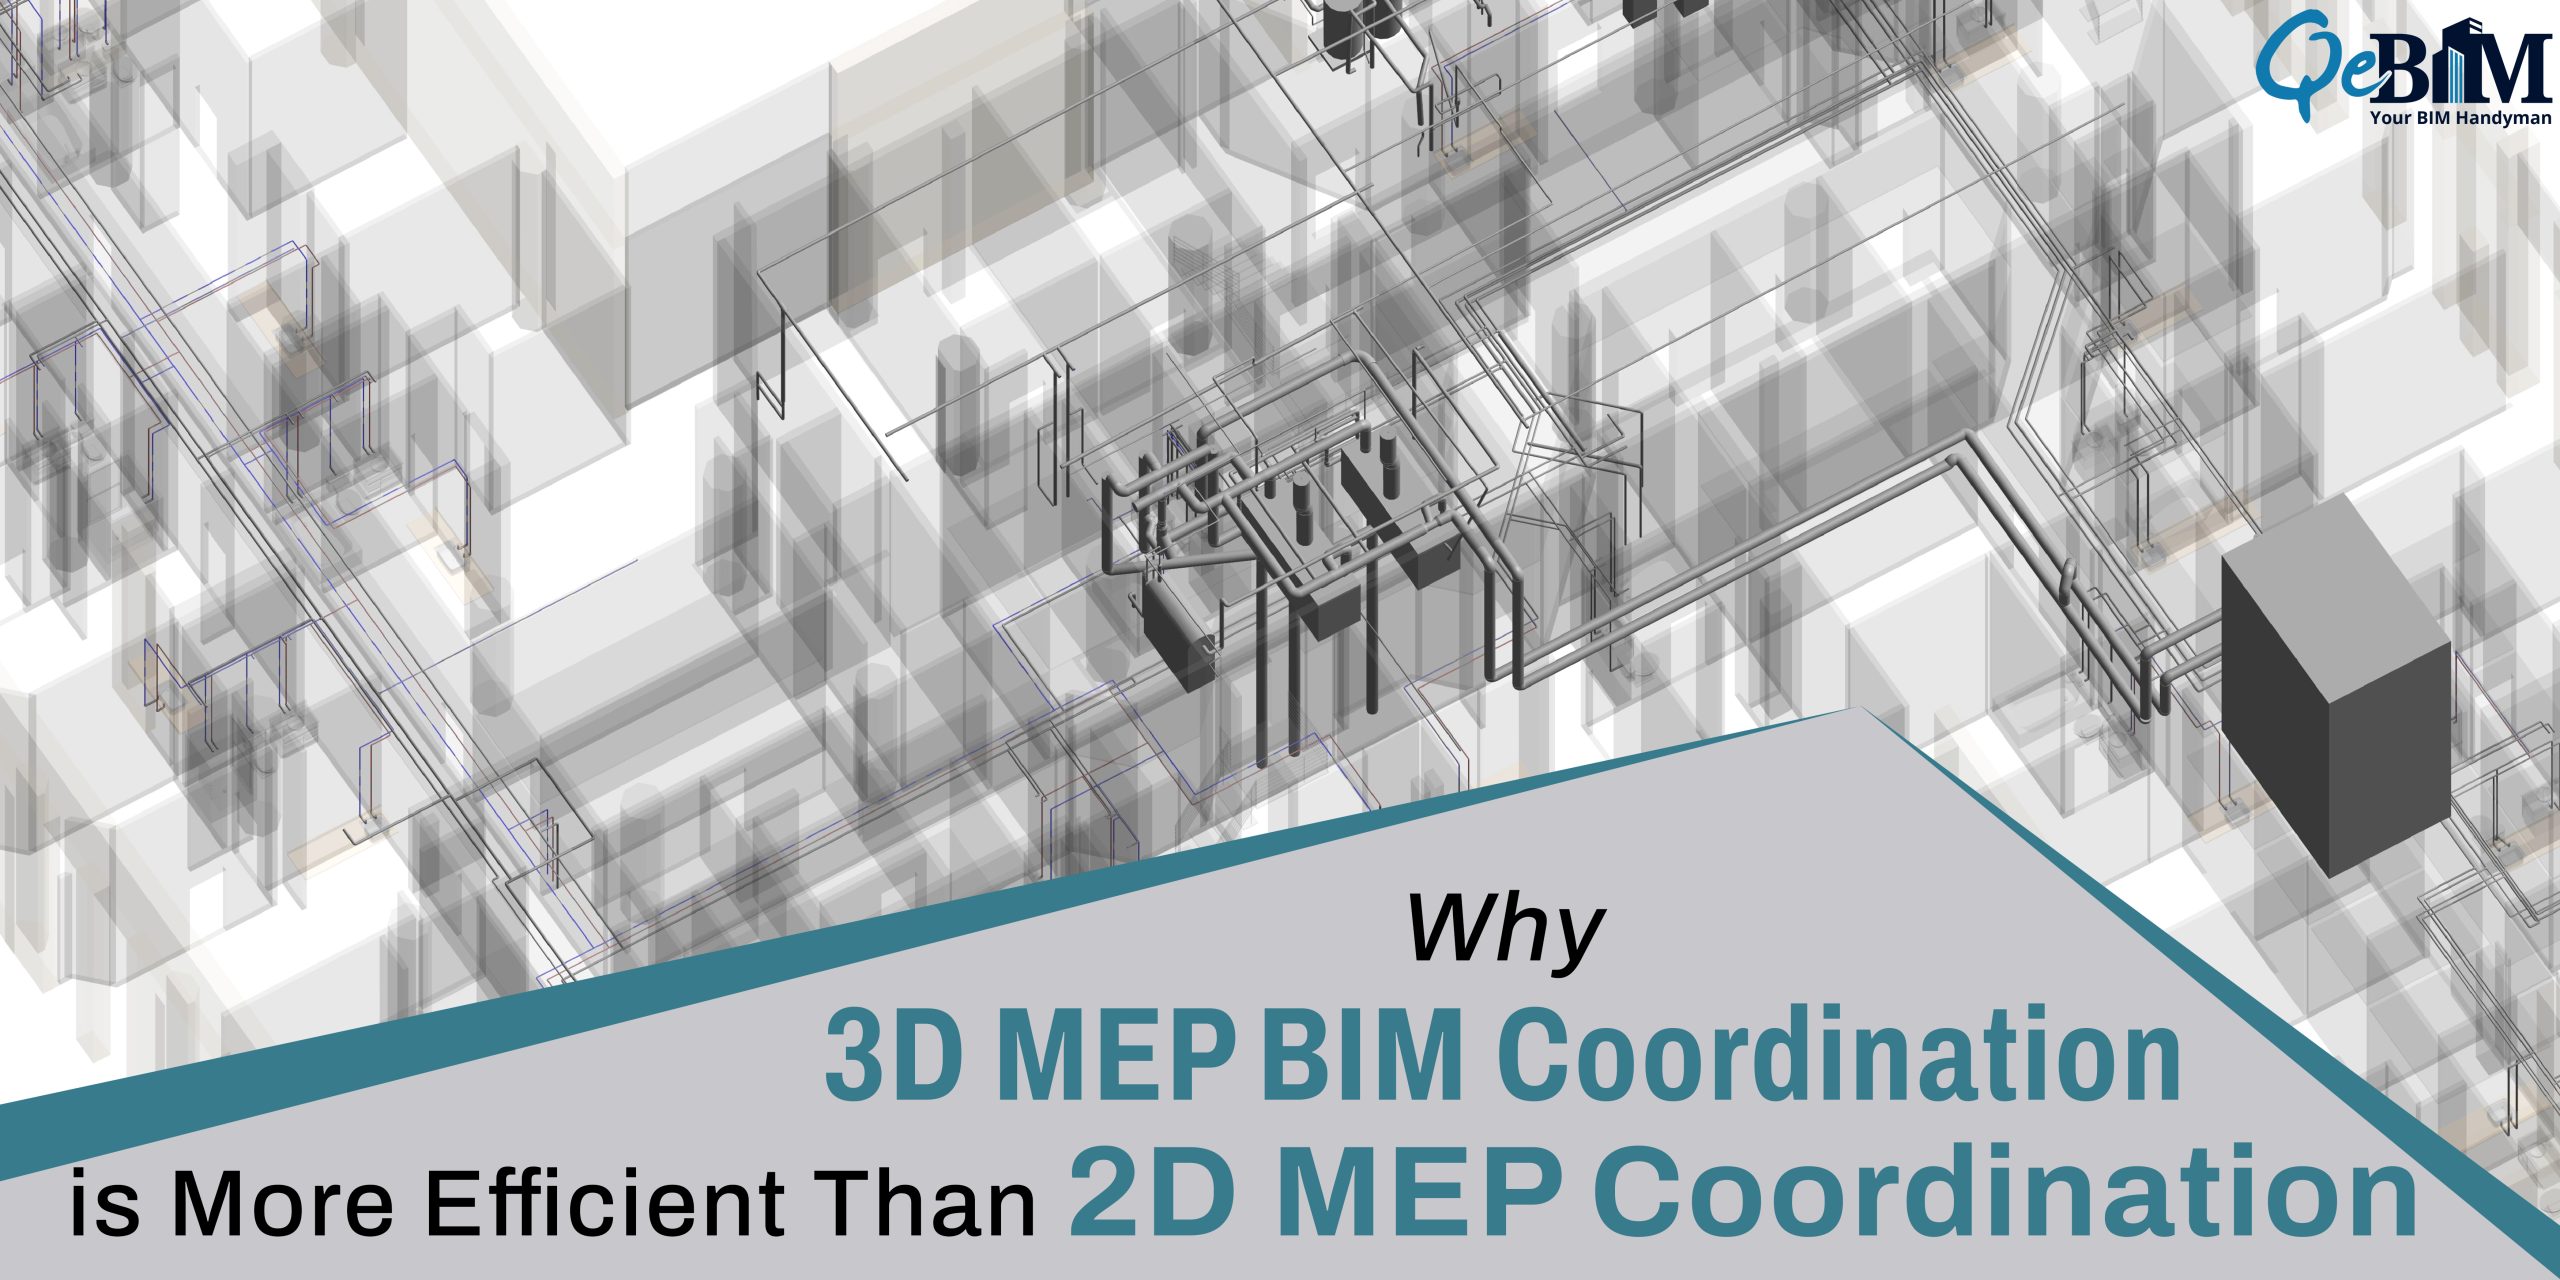 Why 3D MEP BIM Coordination is More Efficient and Cost-Effective Than 2D MEP Coordination